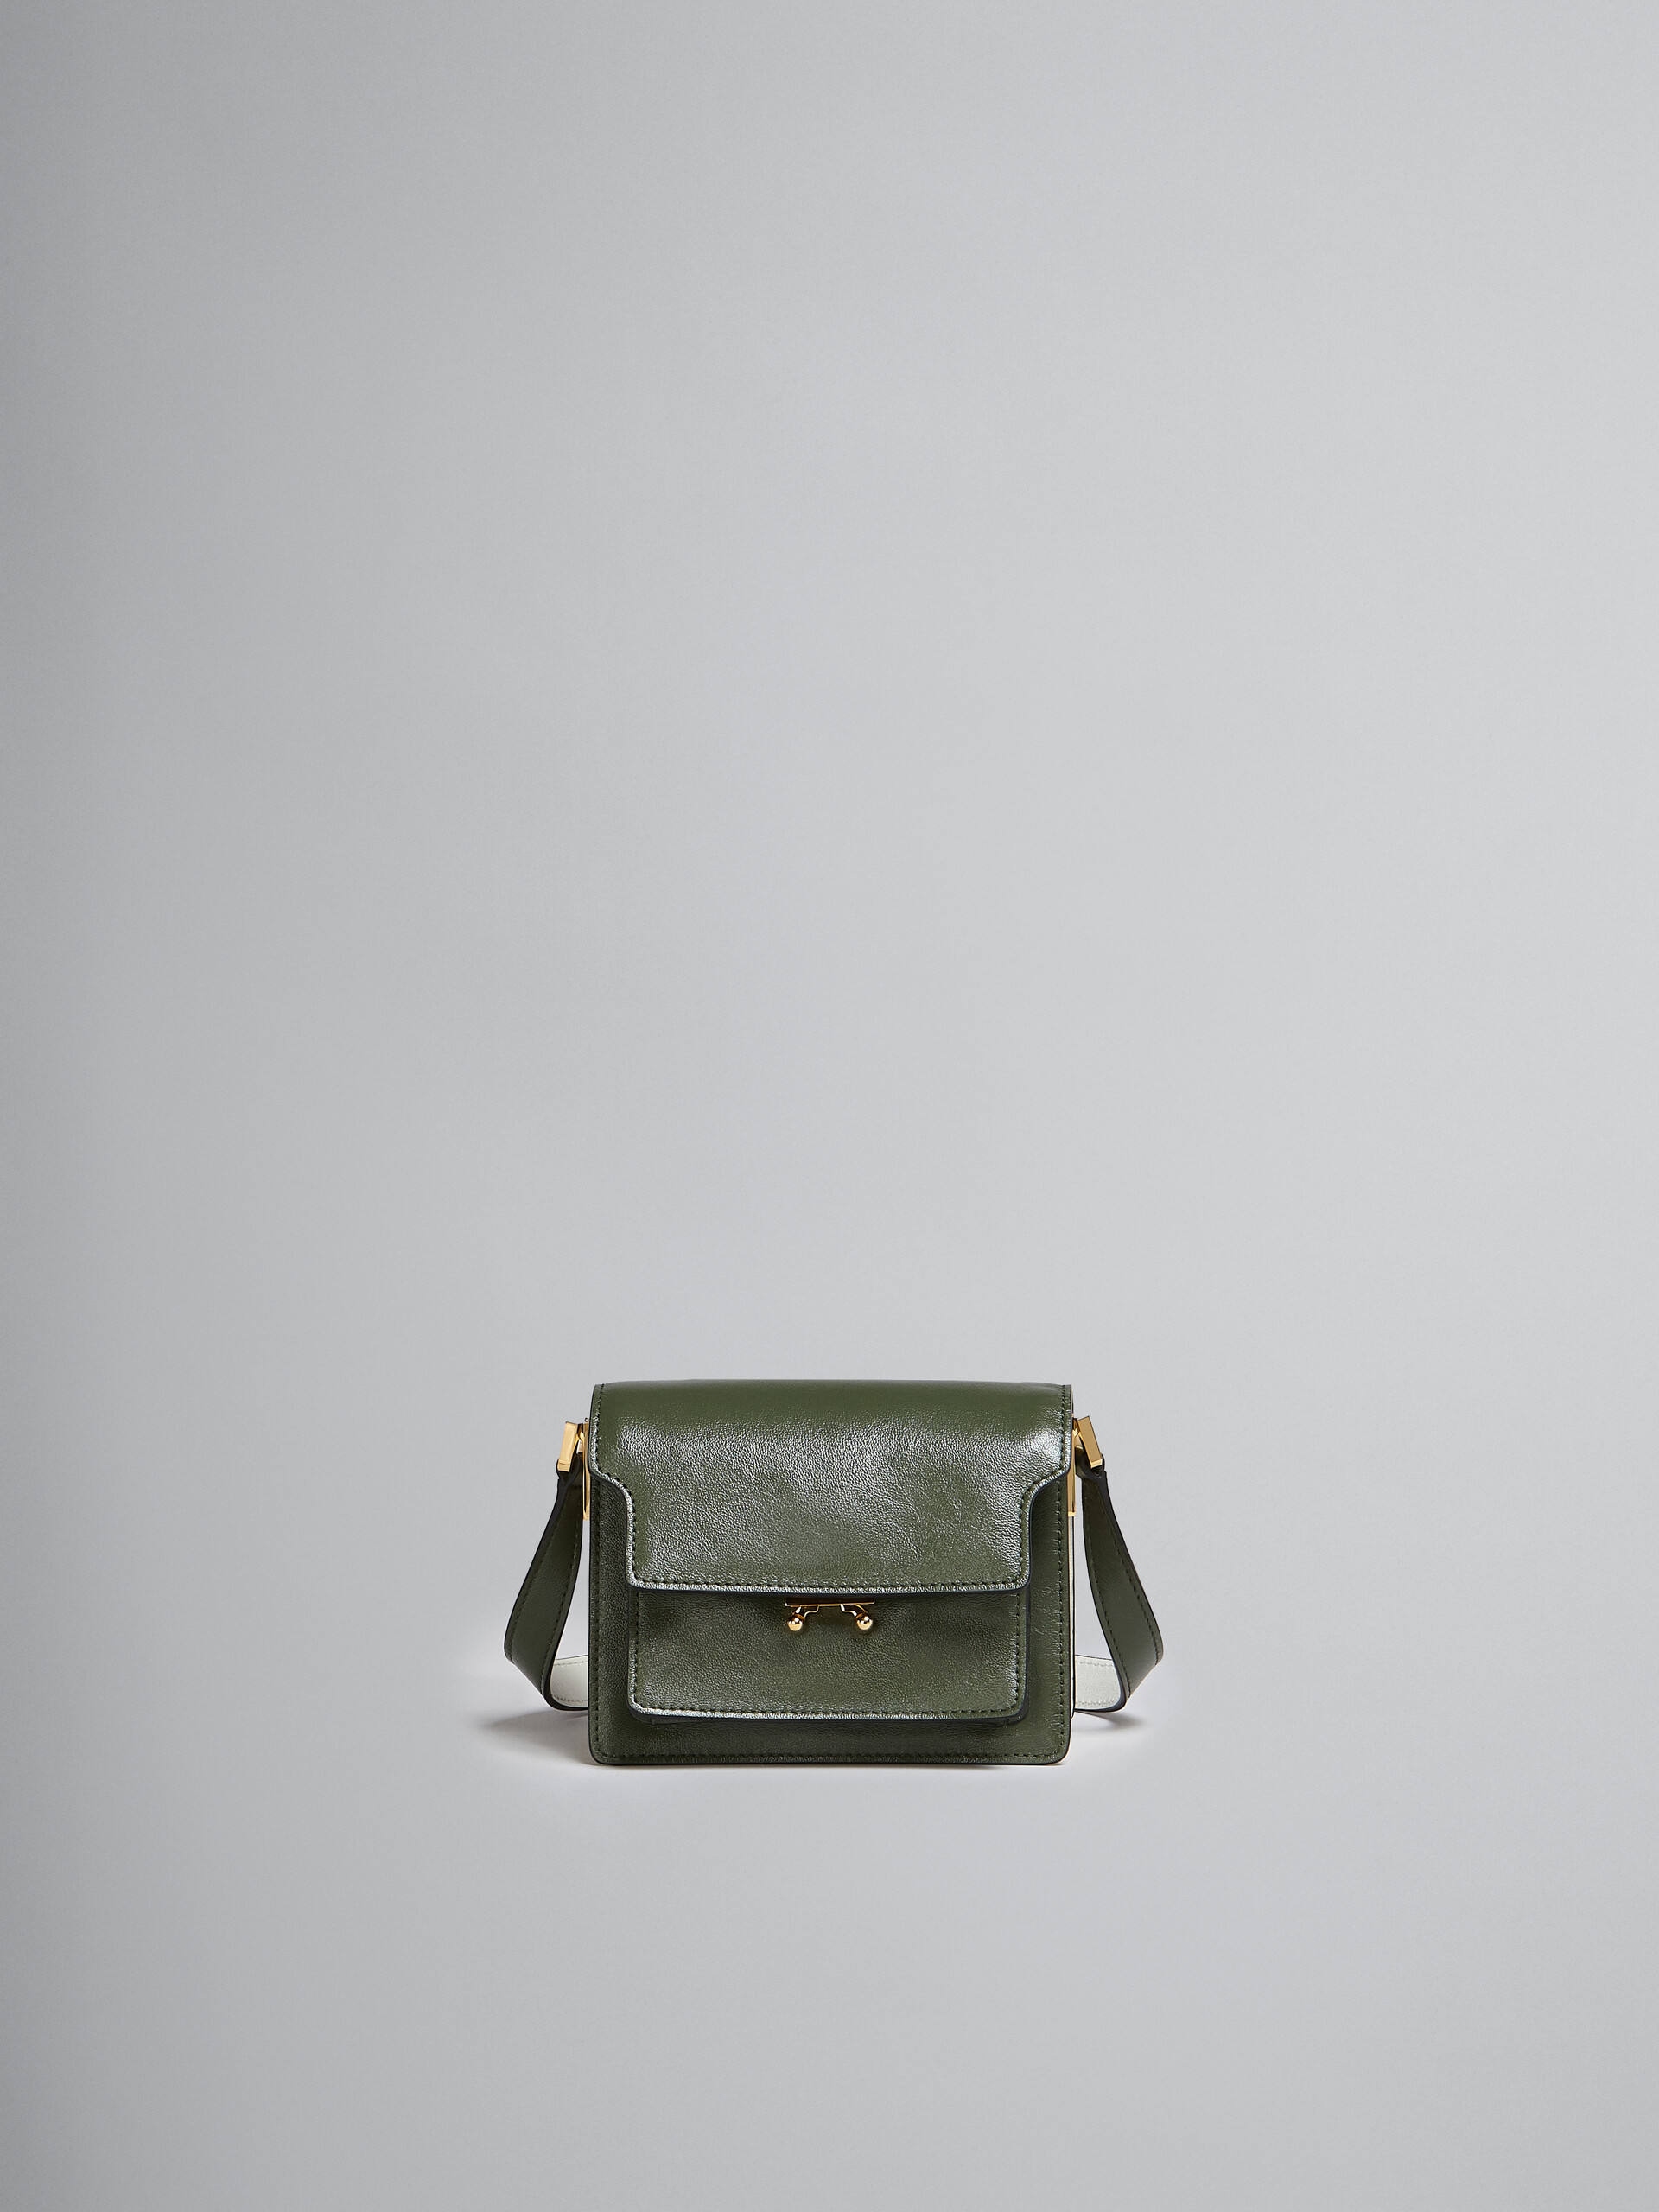 Trunk Soft Mini Bag in green and white leather - Shoulder Bags - Image 1